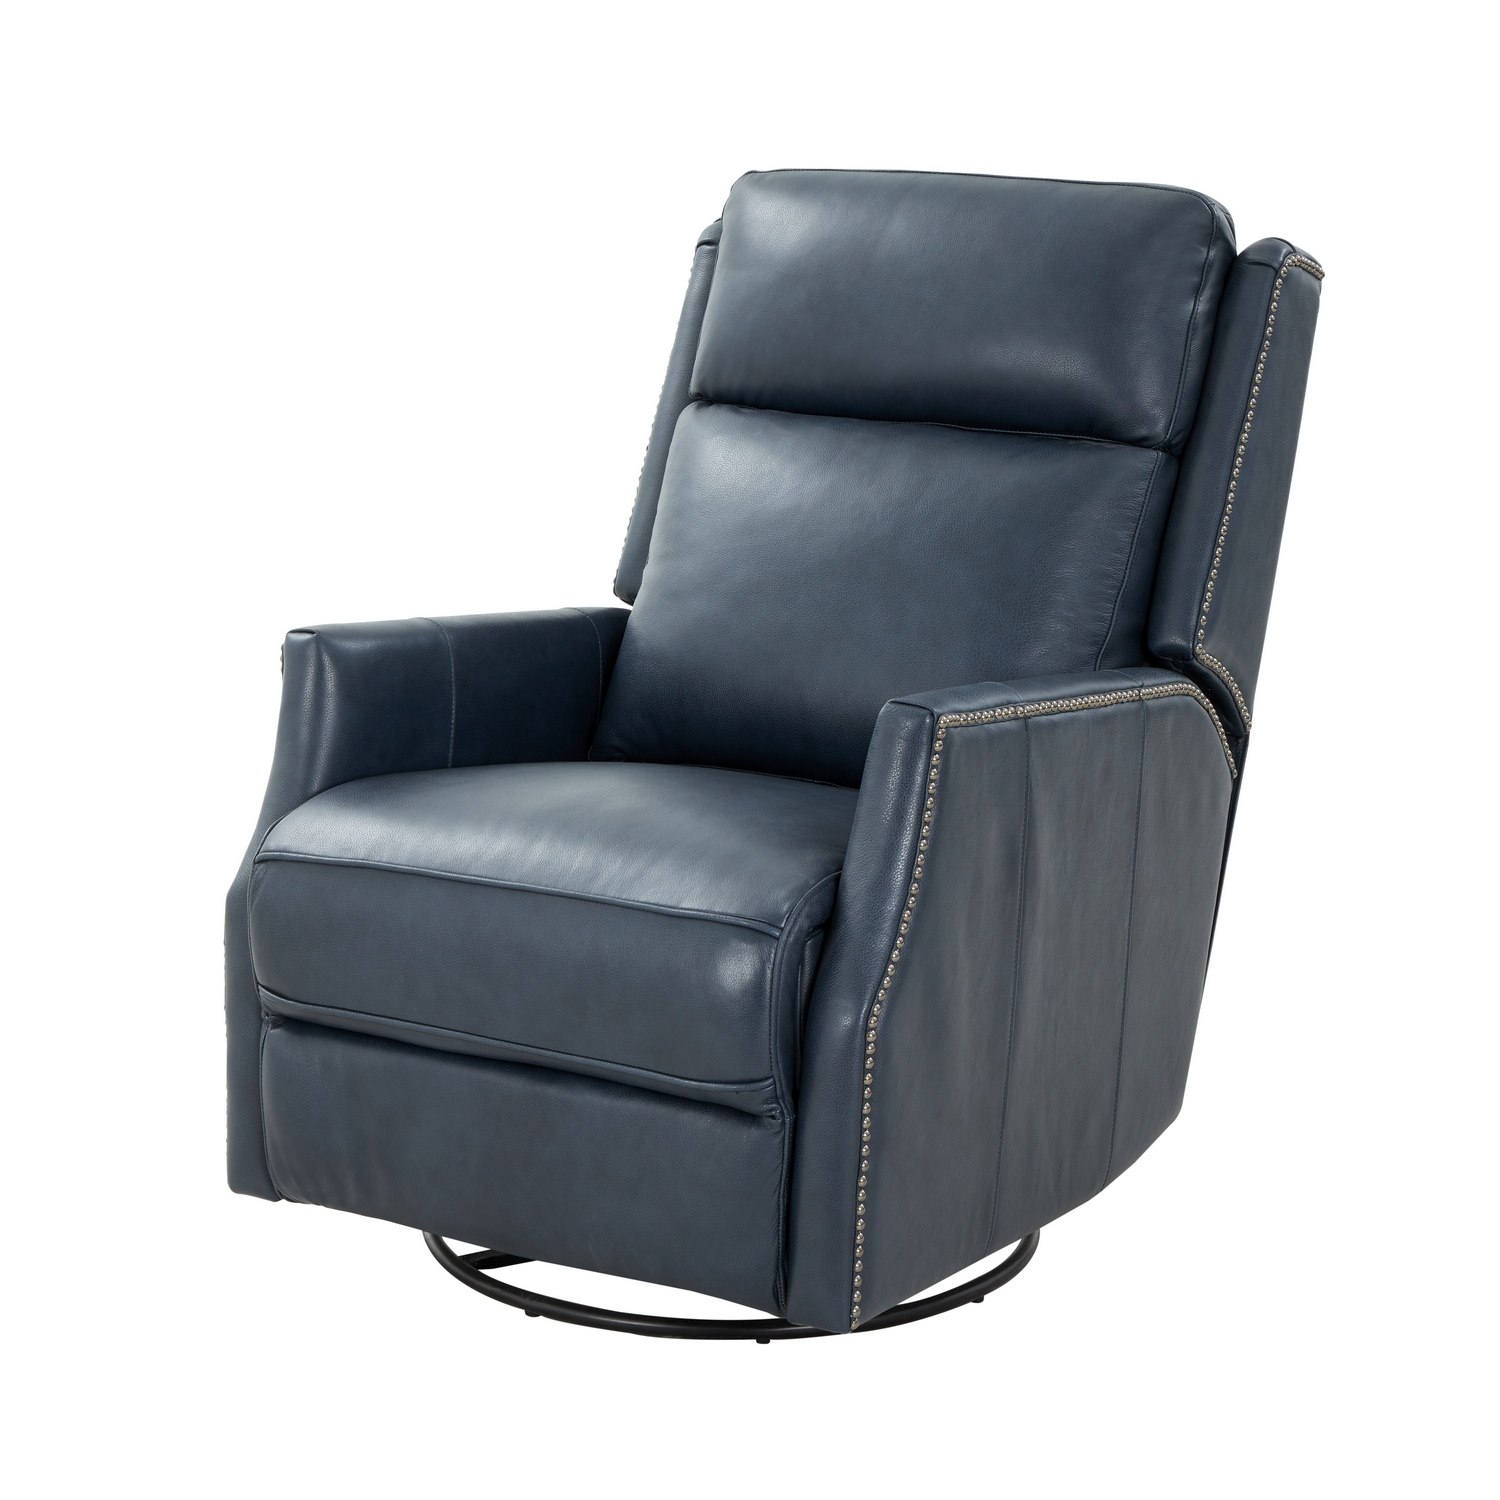 Barcalounger Cavill Swivel Glider Recliner Chair with Power Recline and Power Head Rest - Barone Navy Blue/All Leather